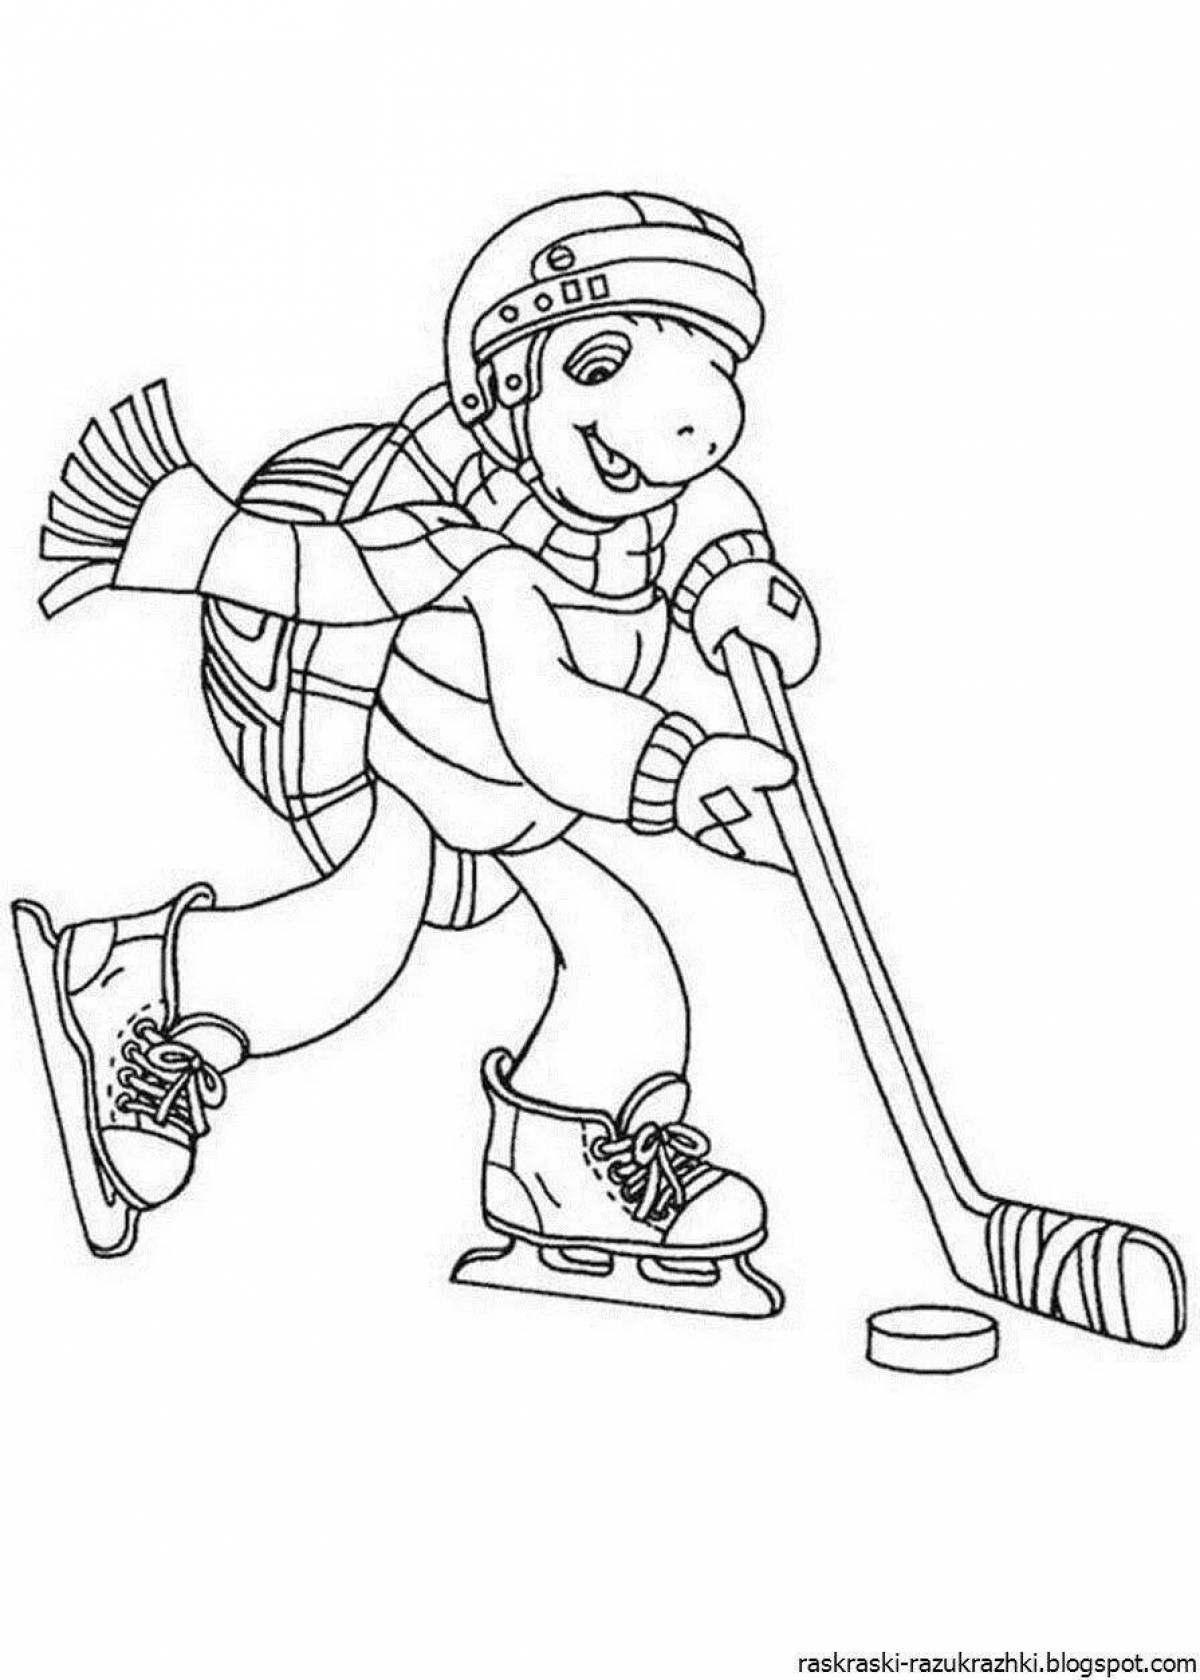 Glorious winter sports coloring page for 4-5 year olds